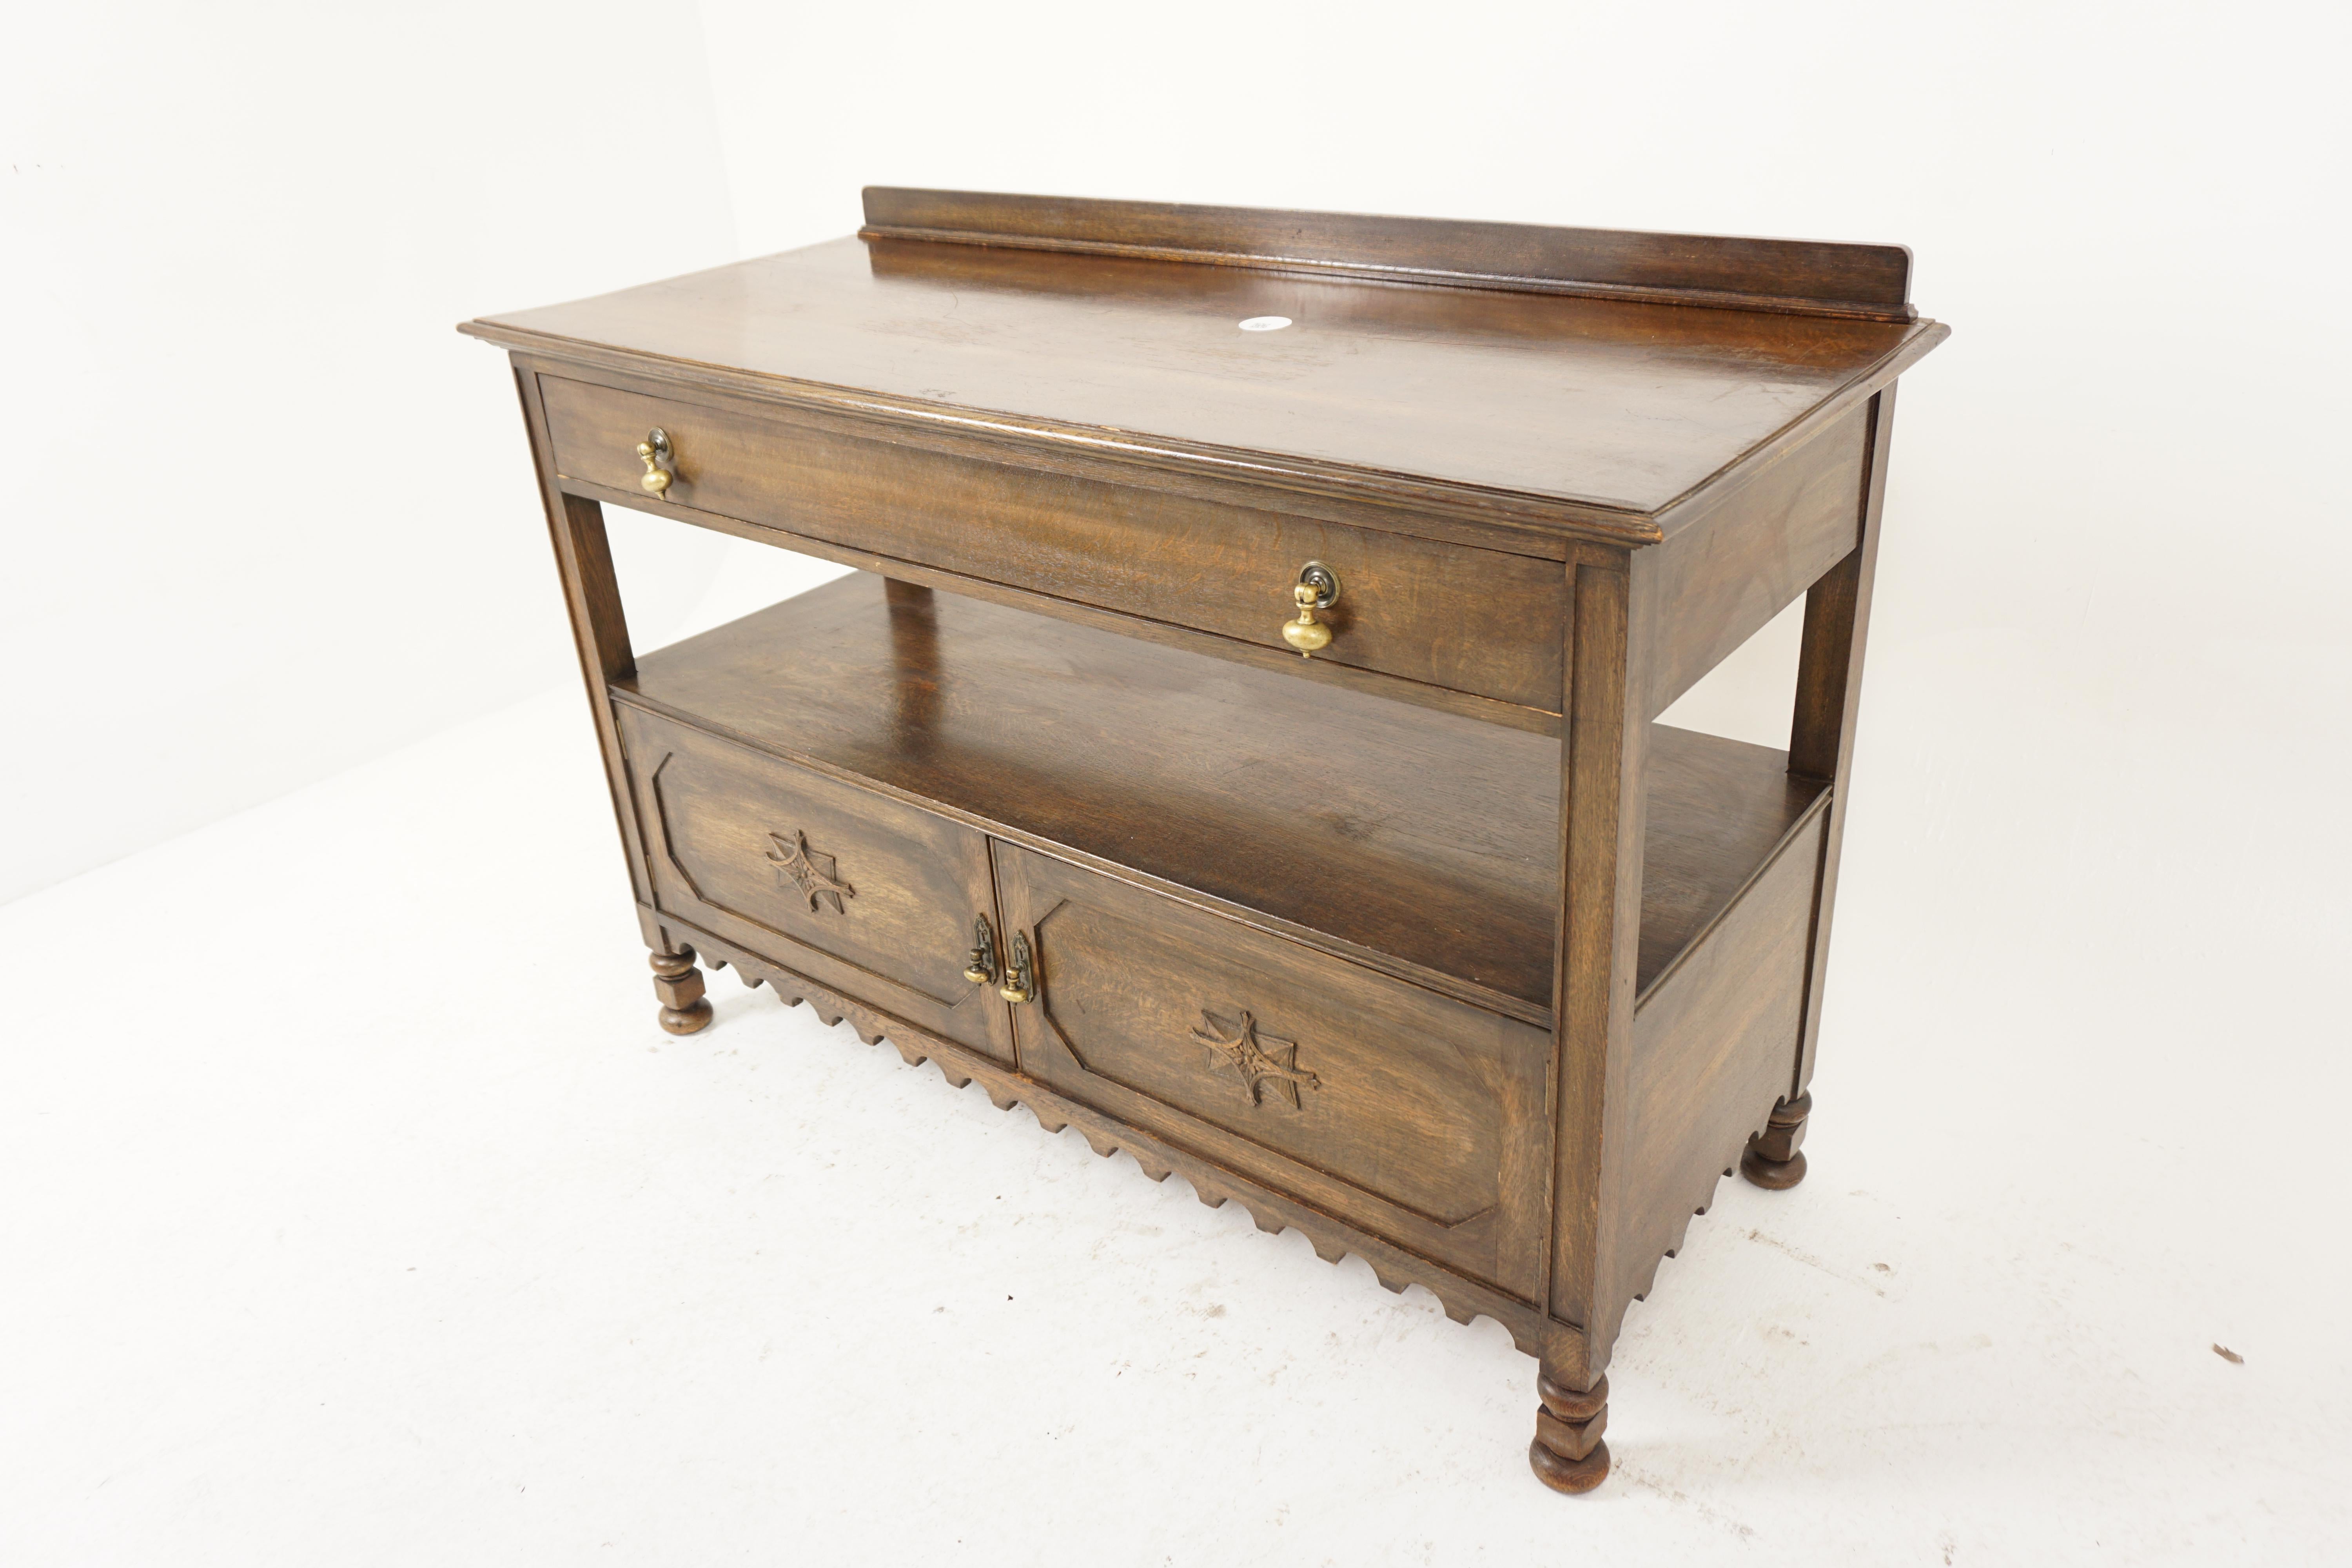 Antique Oak Arts & Crafts Hall Table, Serving, Sofa Table, Scotland 1910, H1029

Scotland 1910
Sold oak
Original finish
Rectangular moulded top with small gallery on the back
One large dovetailed drawer with large brass pulls
Shelf underneath with a